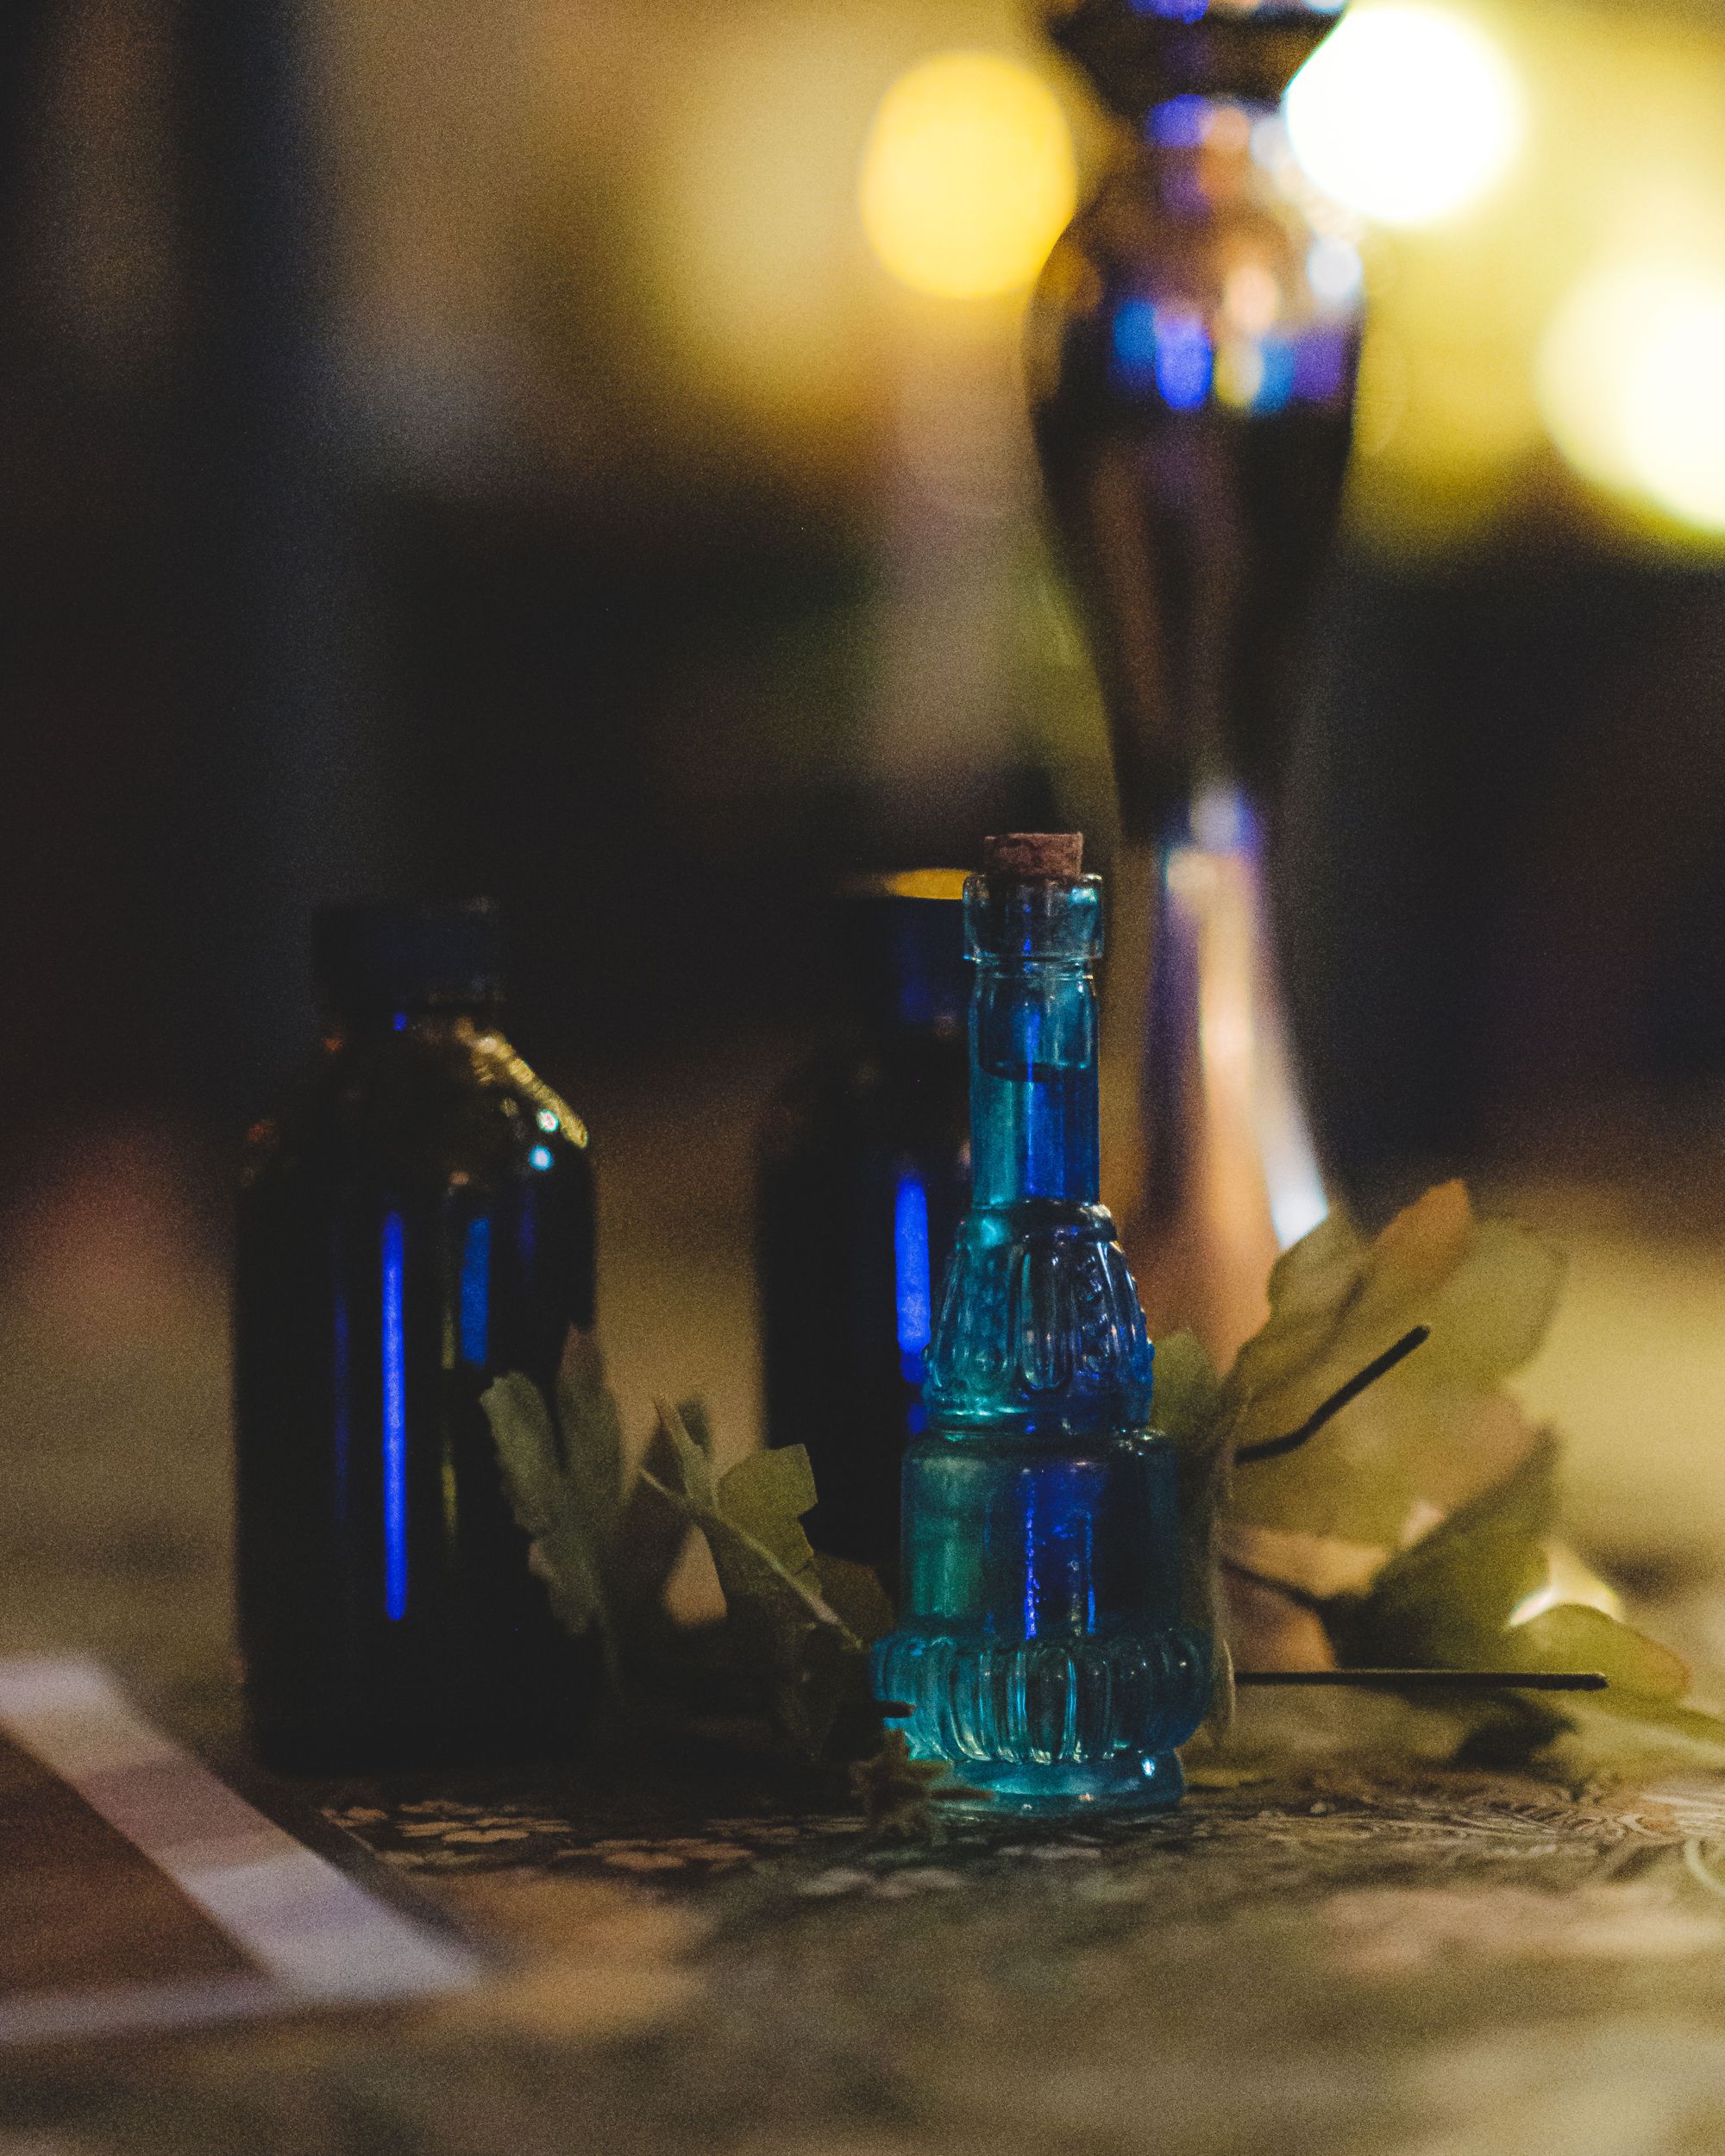 The Wizards Den Vancouver – Potion Ingredient-Gathering